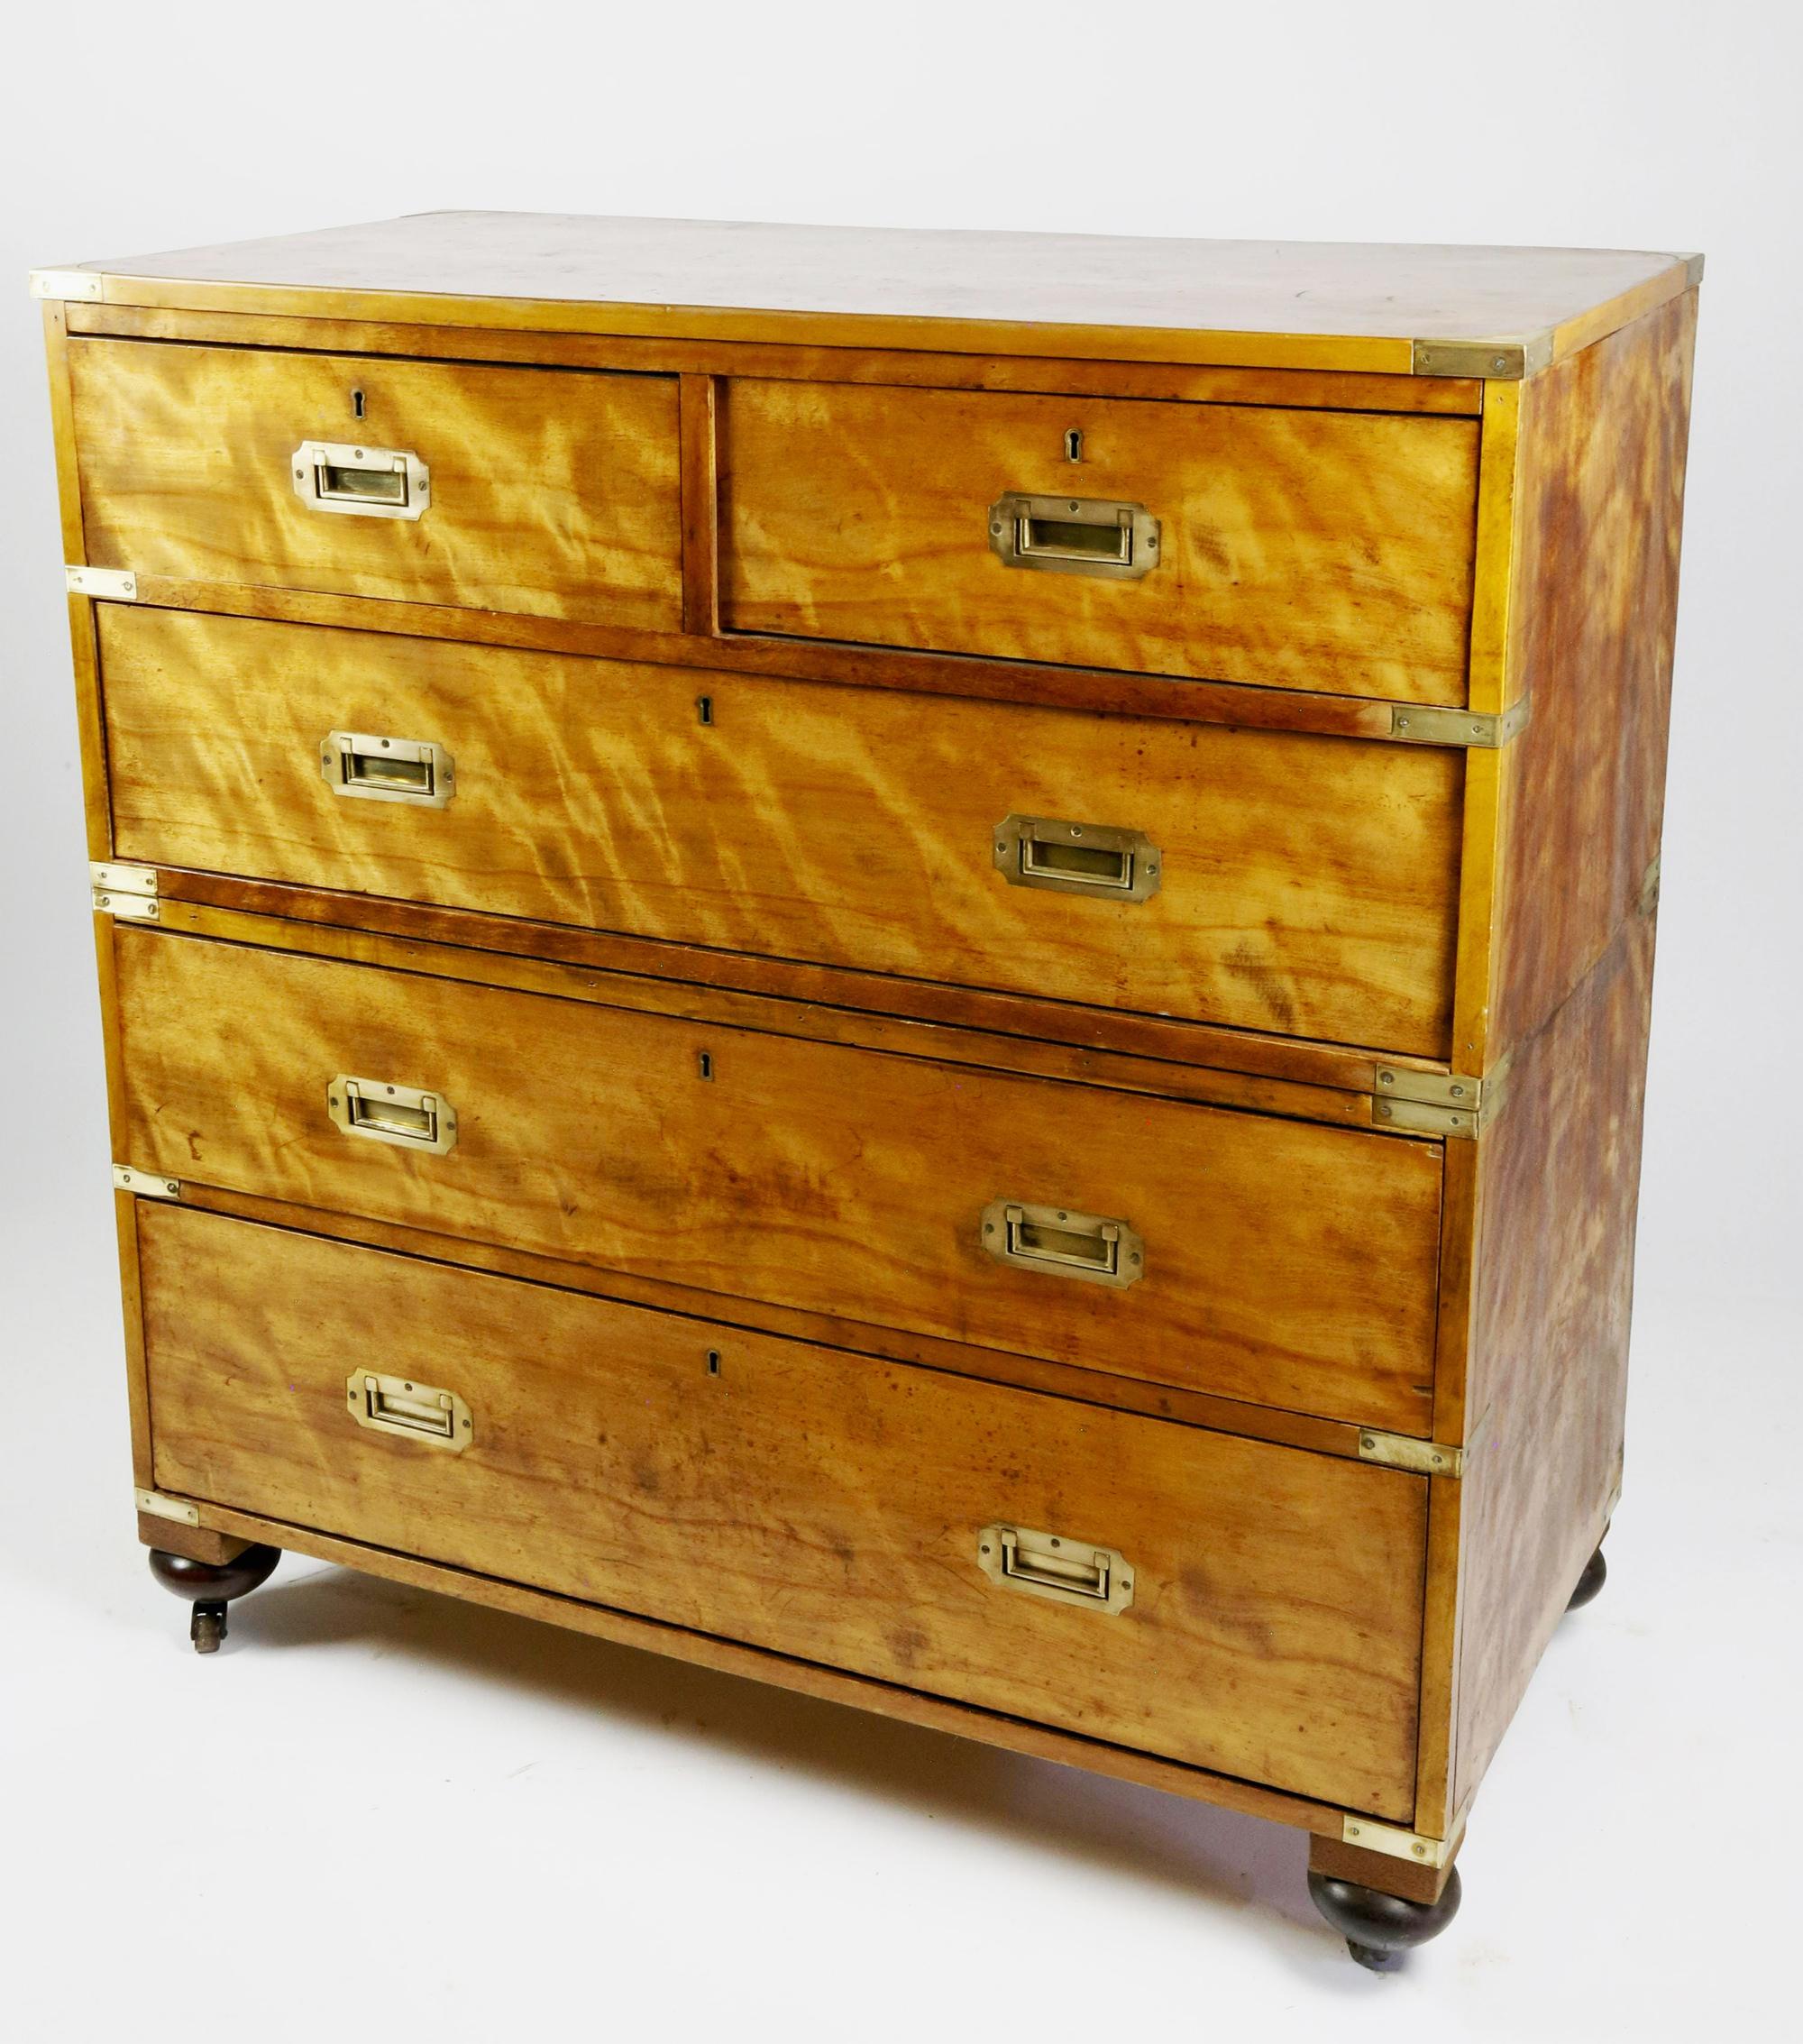 British campaign chest of drawers in flame birch,
Circa 1840

The beautifully colored flame birch campaign chest of drawers is in two parts with two drawers side by side at the top and three long drawers below with original brass pulls to each